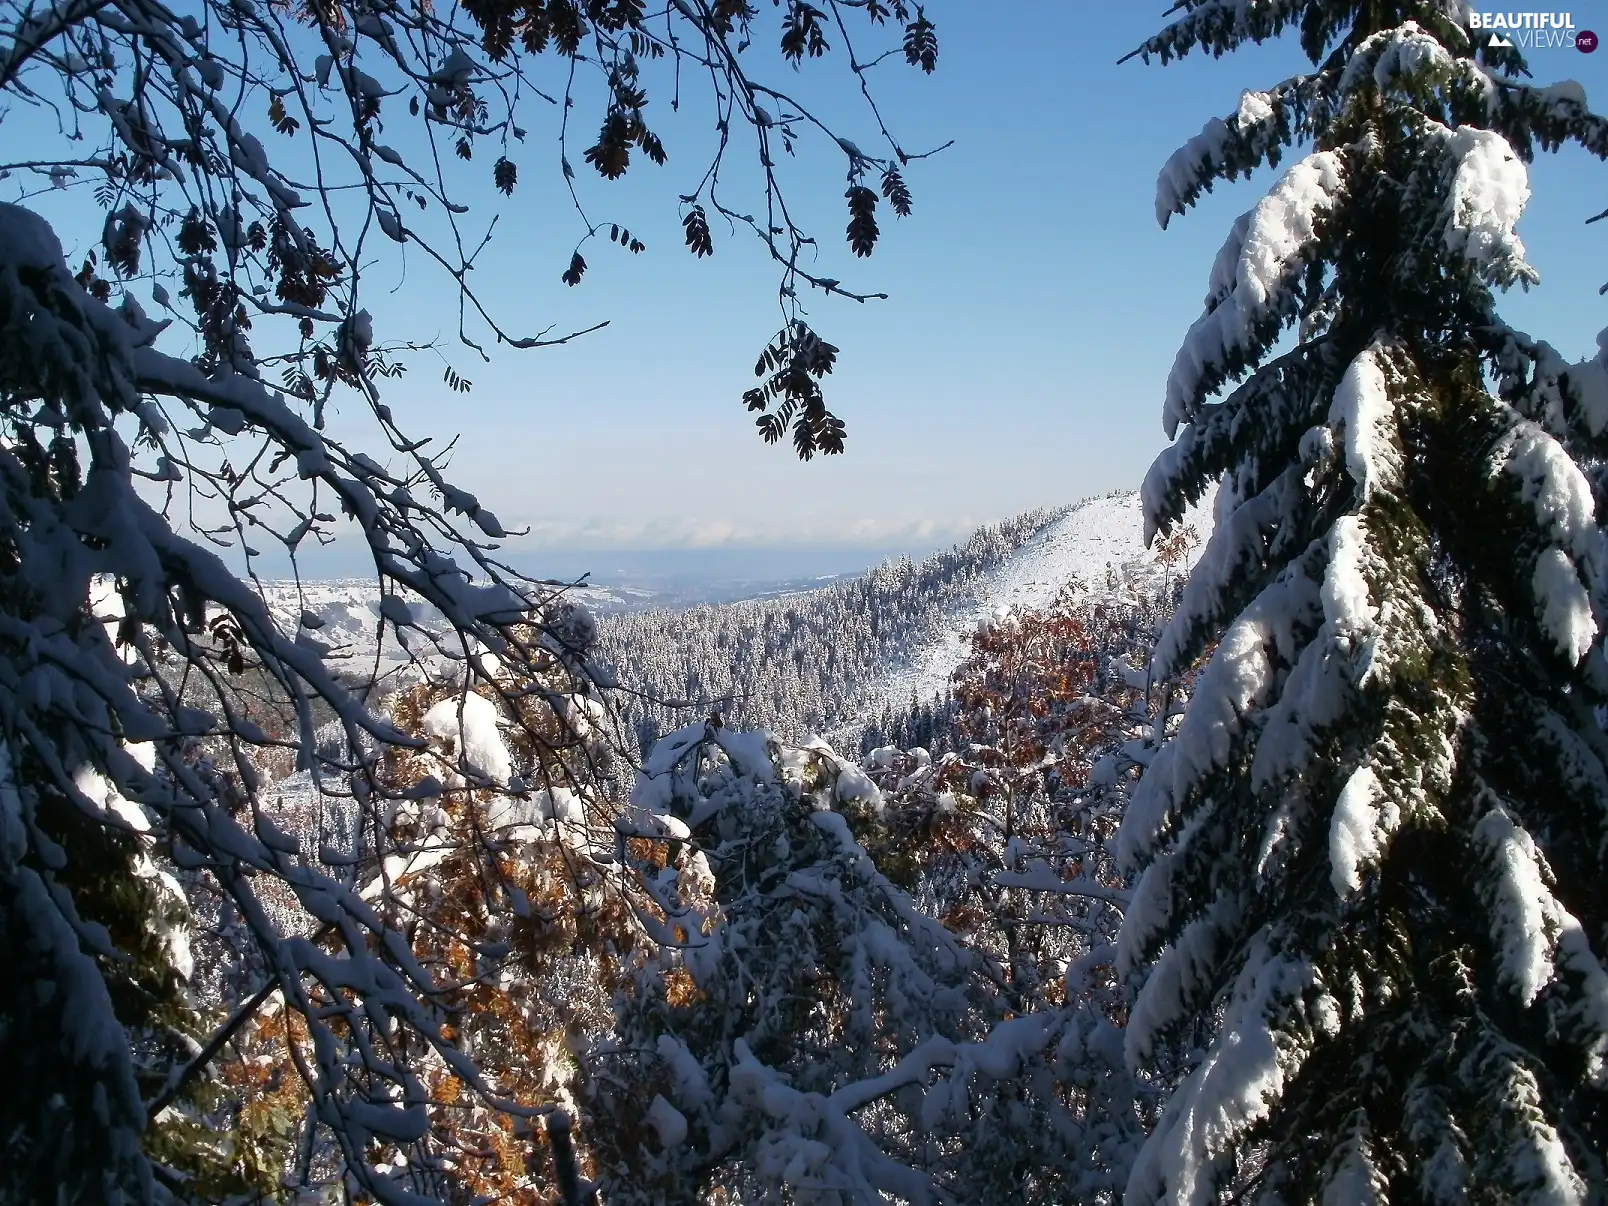 Mountains, viewes, snow, trees